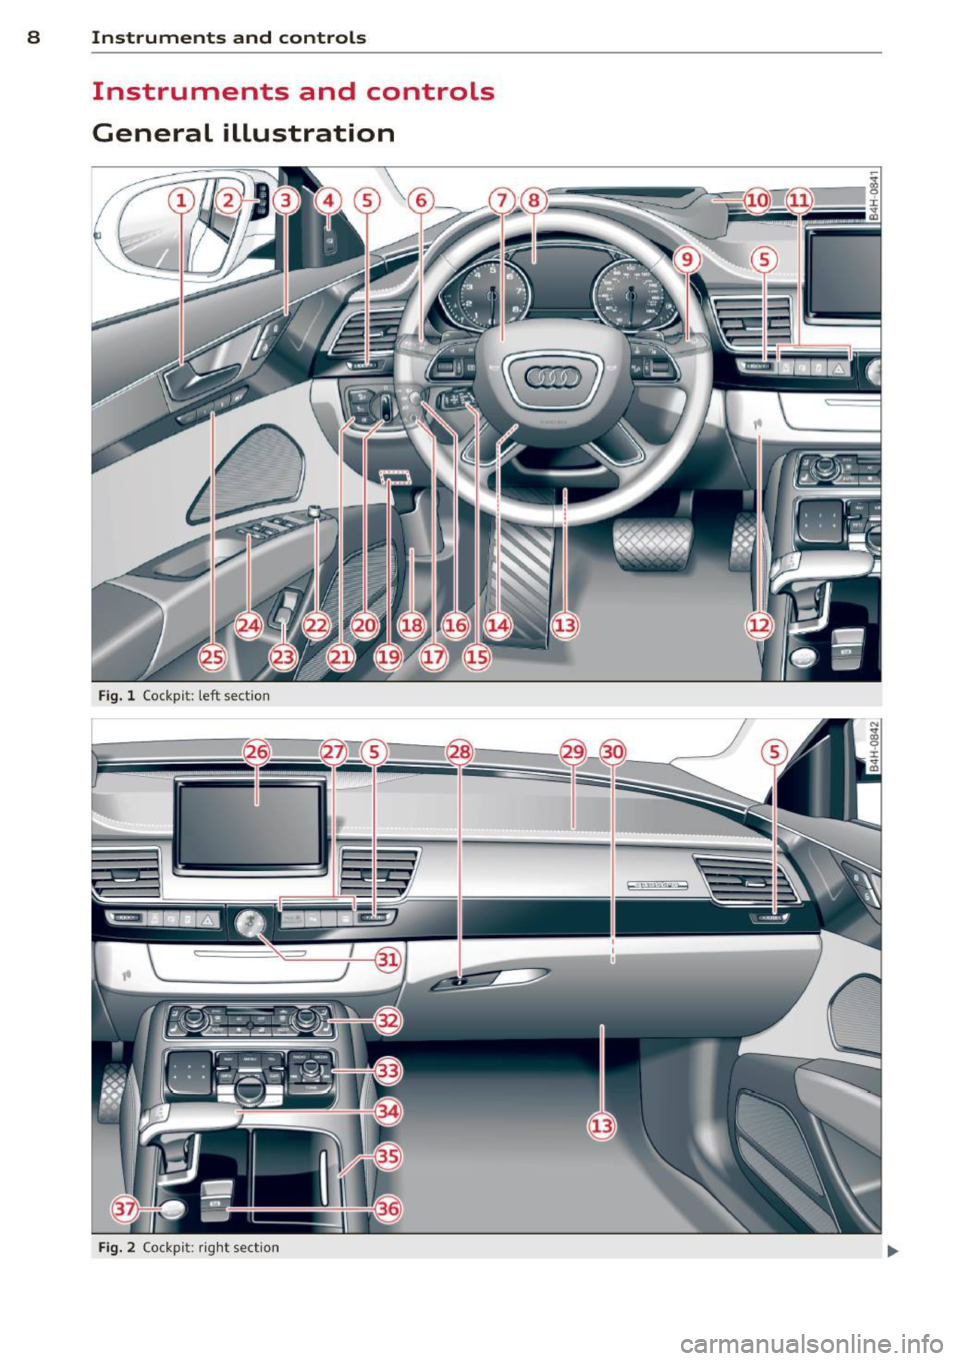 AUDI S8 2015  Owners Manual 8  Instruments and controls 
Instruments  and  controls 
General  illustration 
Fig. l Cockp it:  left  sect io n 
Fig. 2 Co ck pi t: ri ght  sect io n  